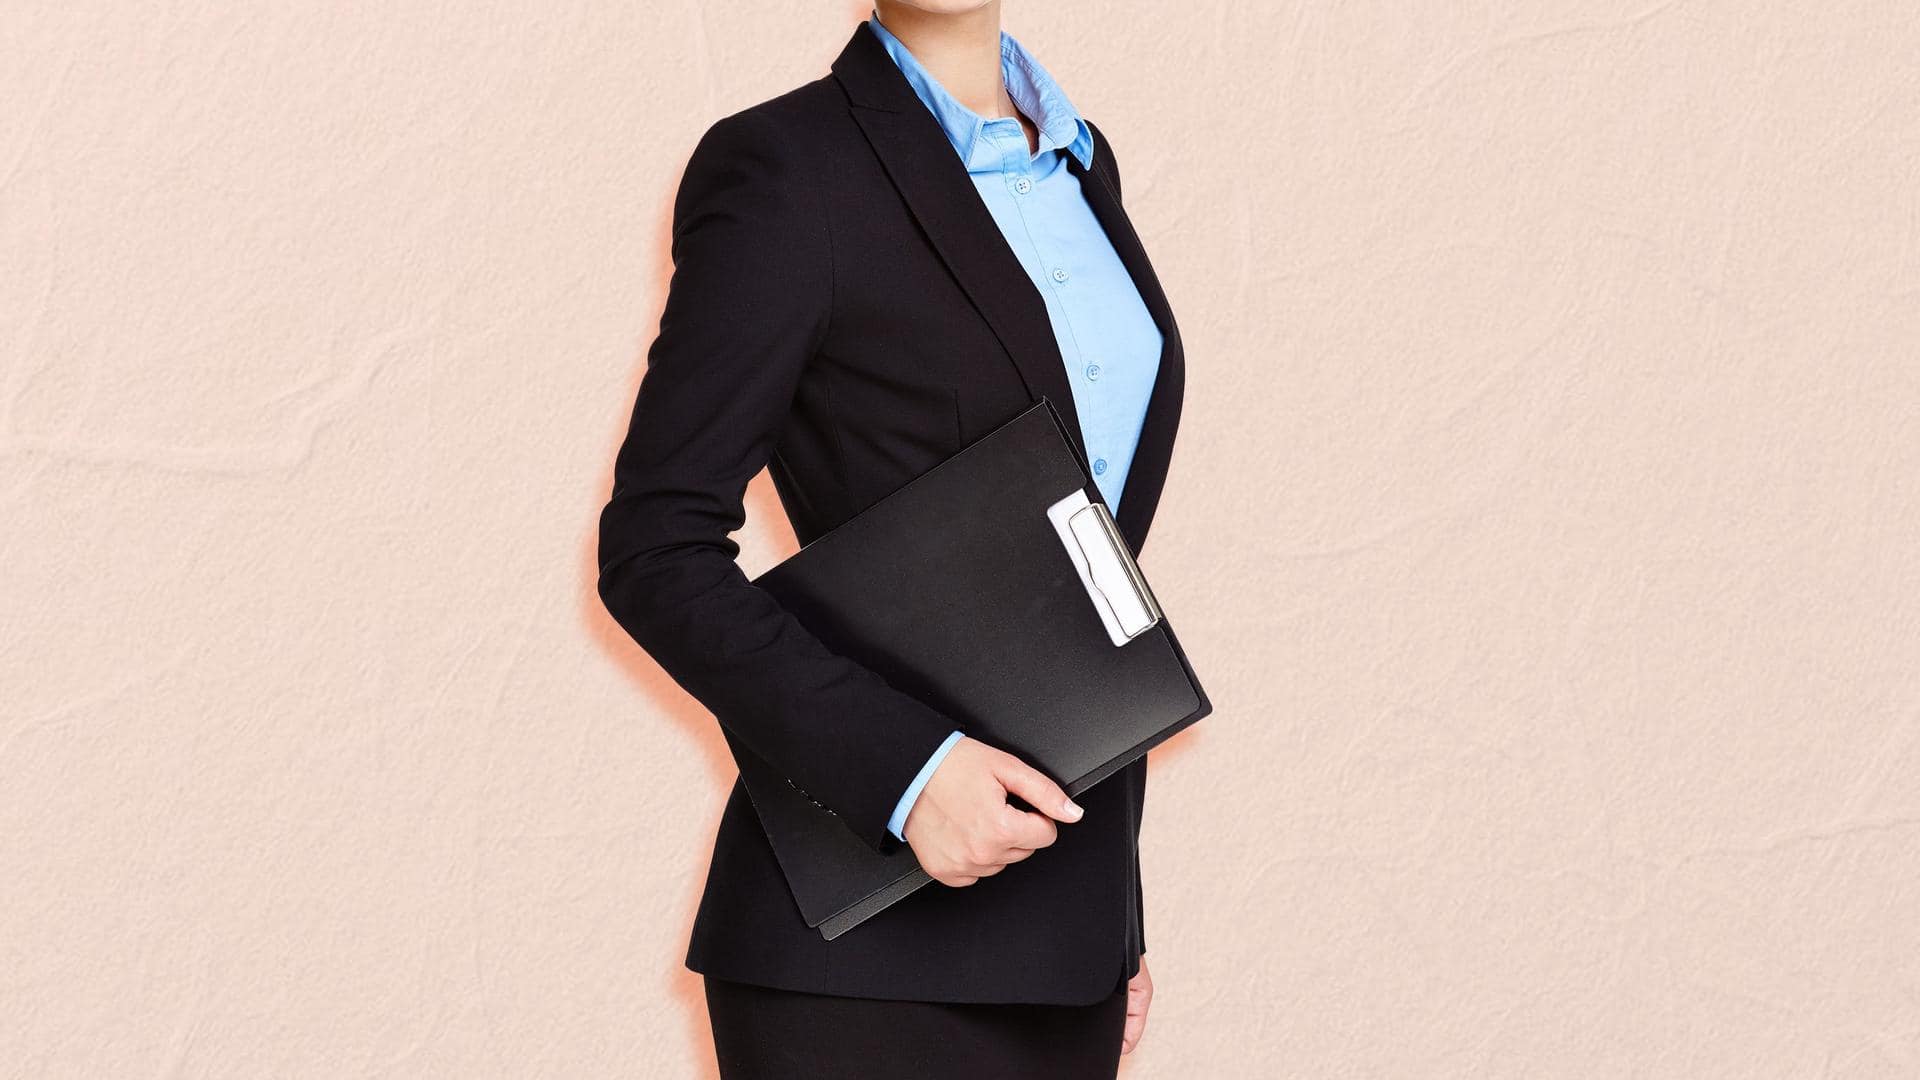 Dress for success: 5 professional attire tips for women